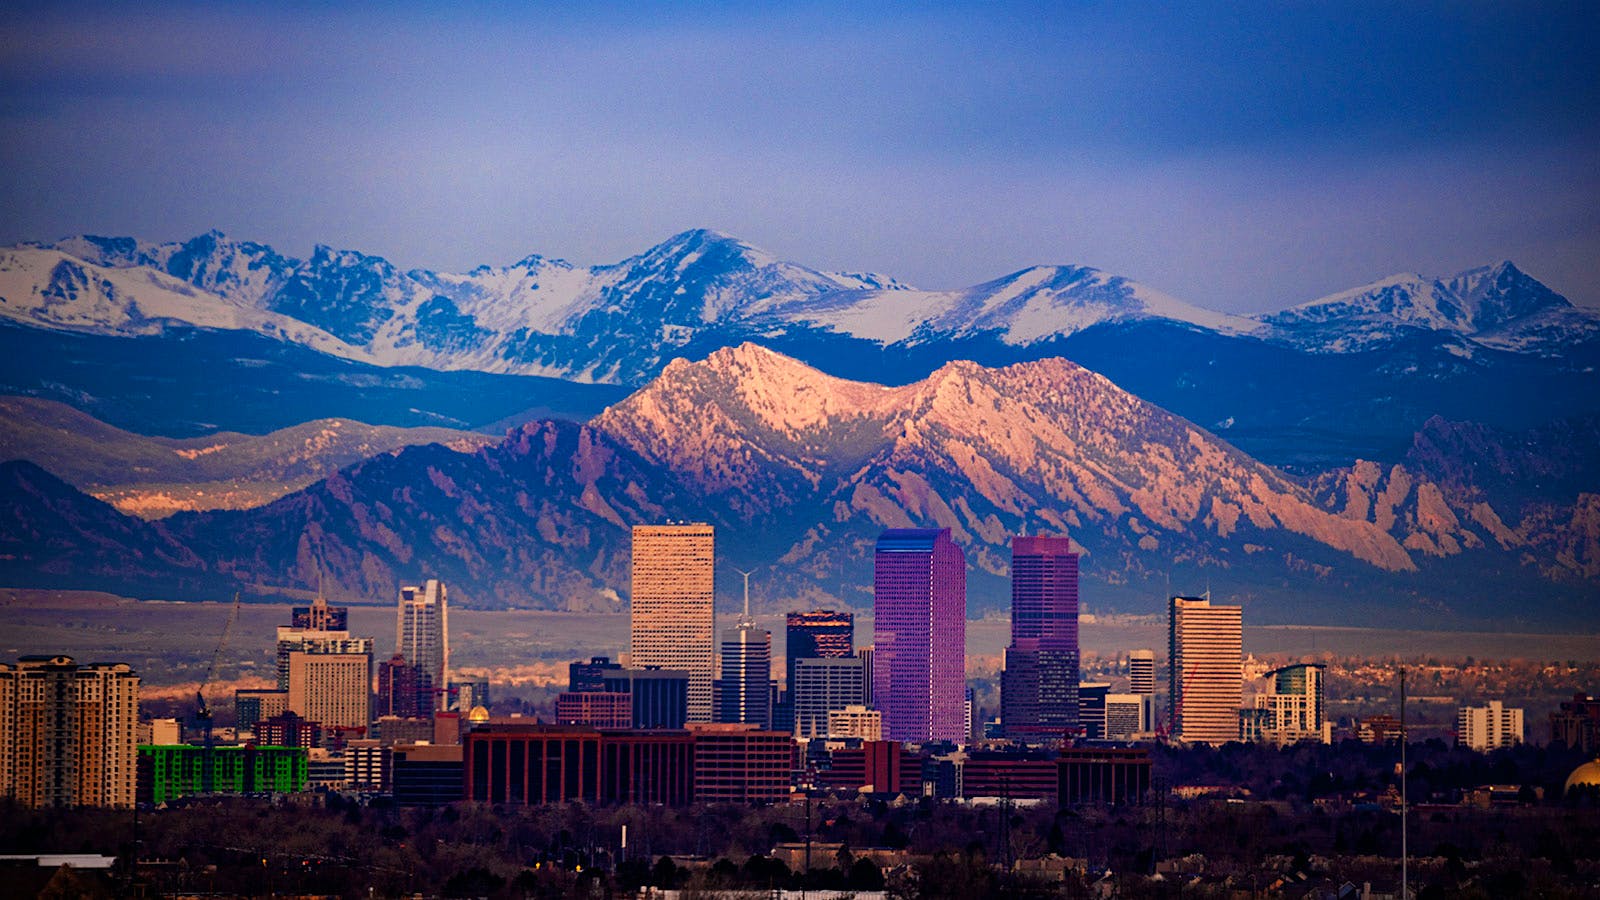 The Denver skyline with the Rocky Mountains in the background